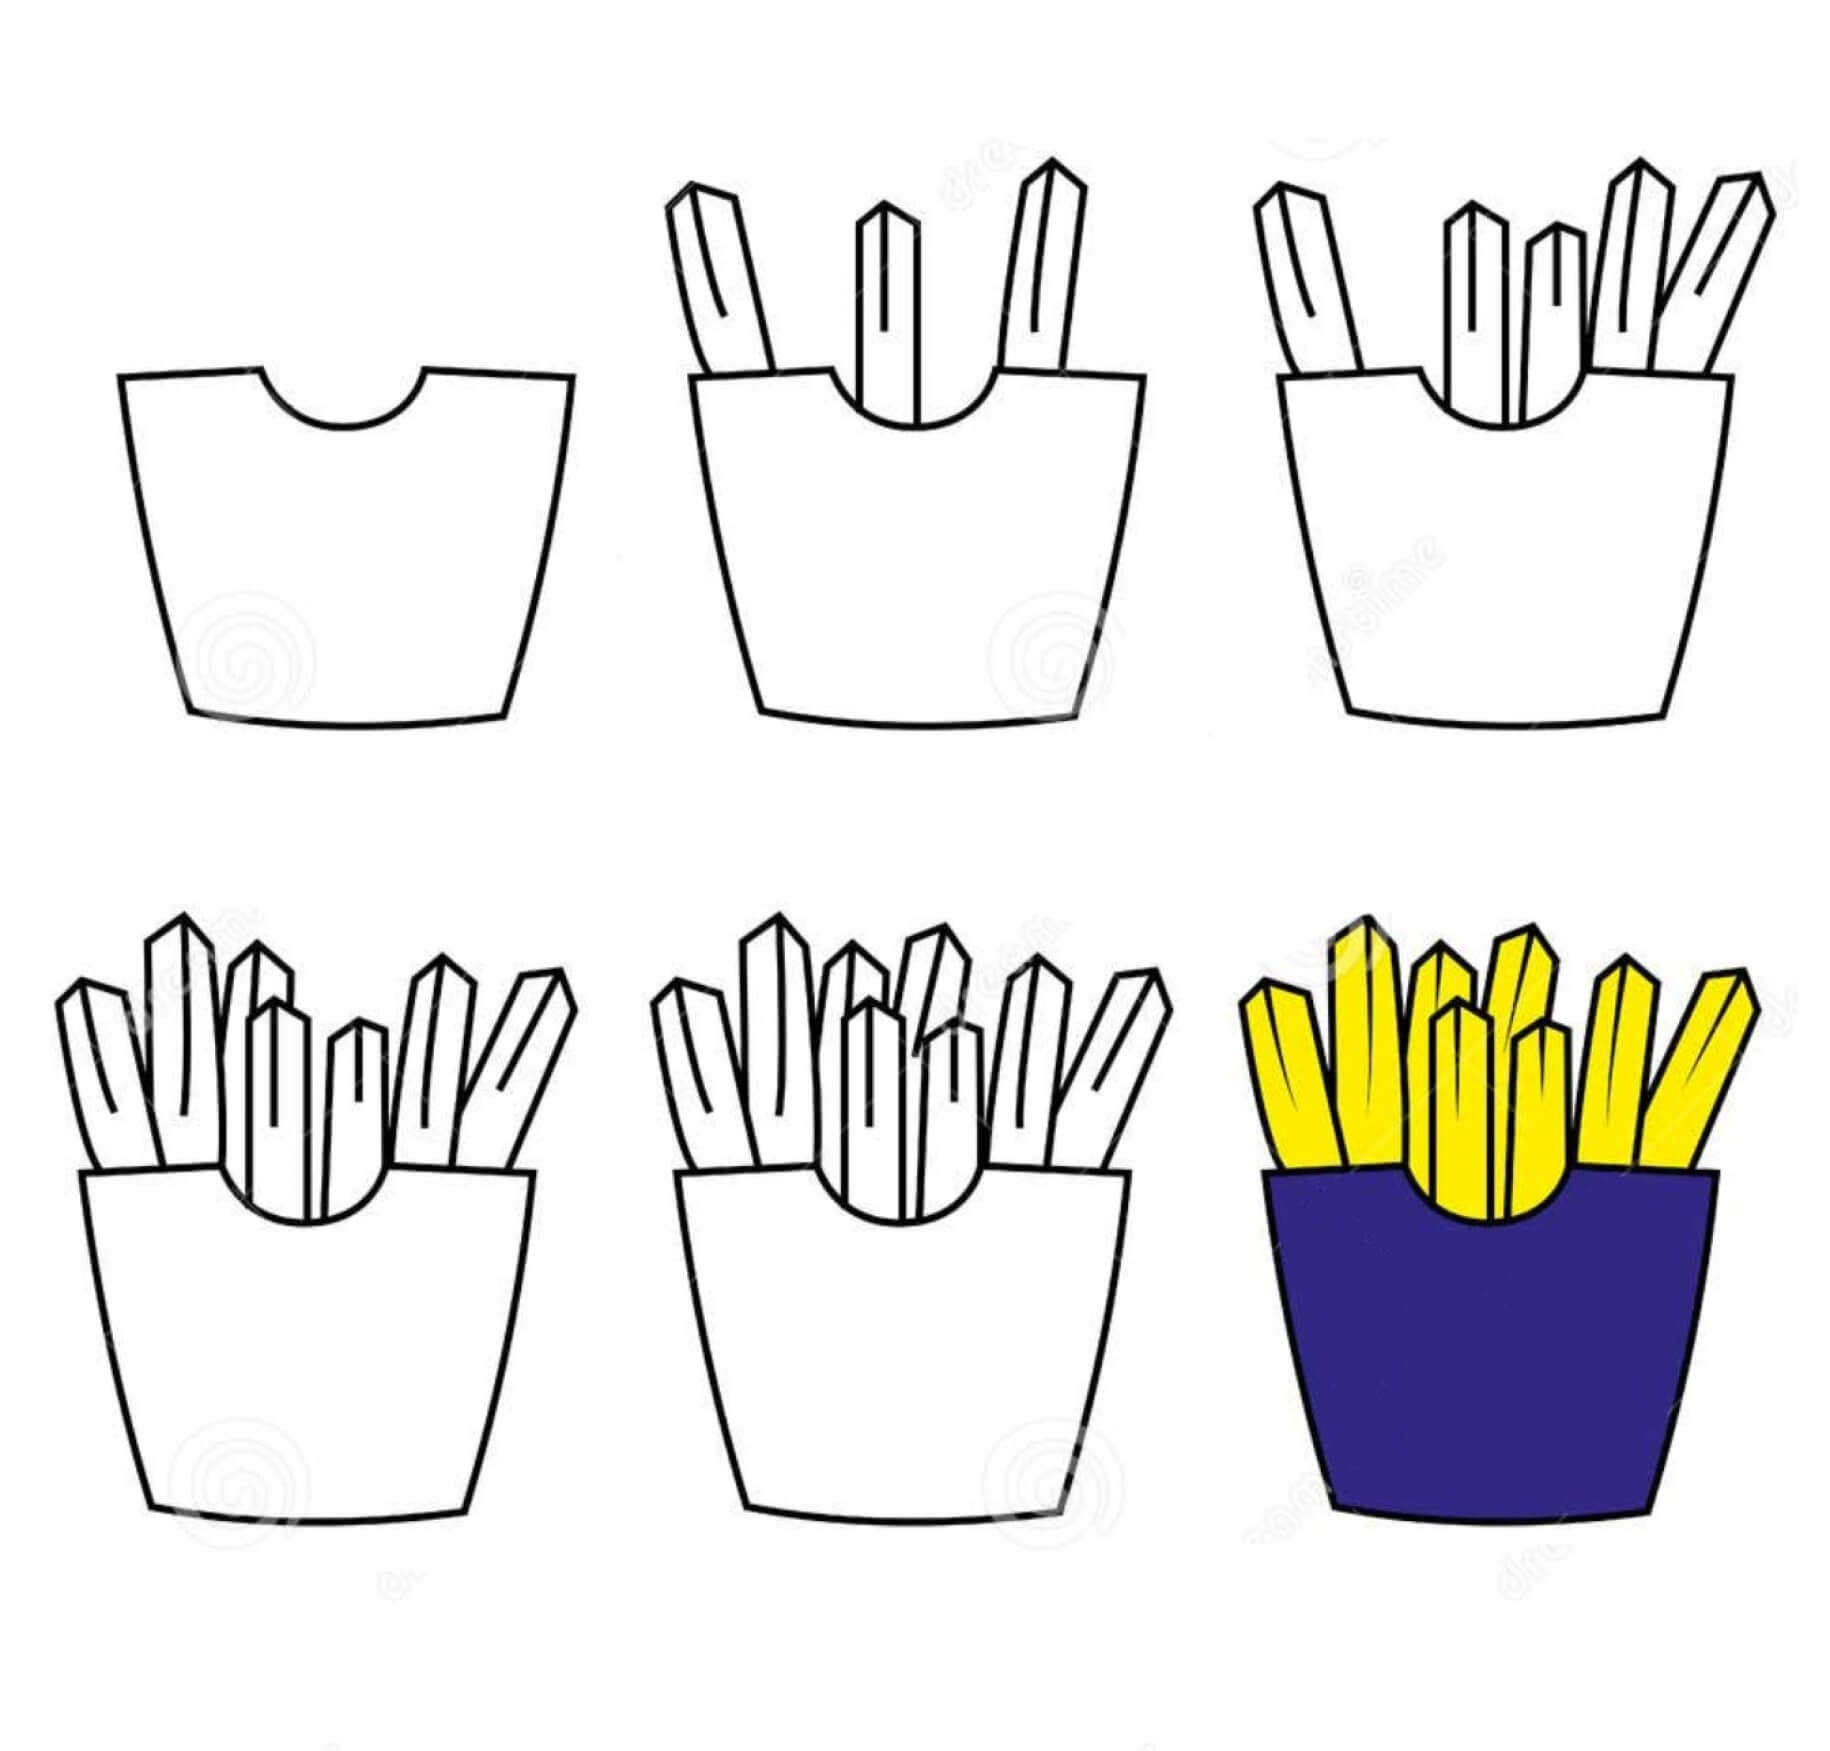 French fries (6) Drawing Ideas